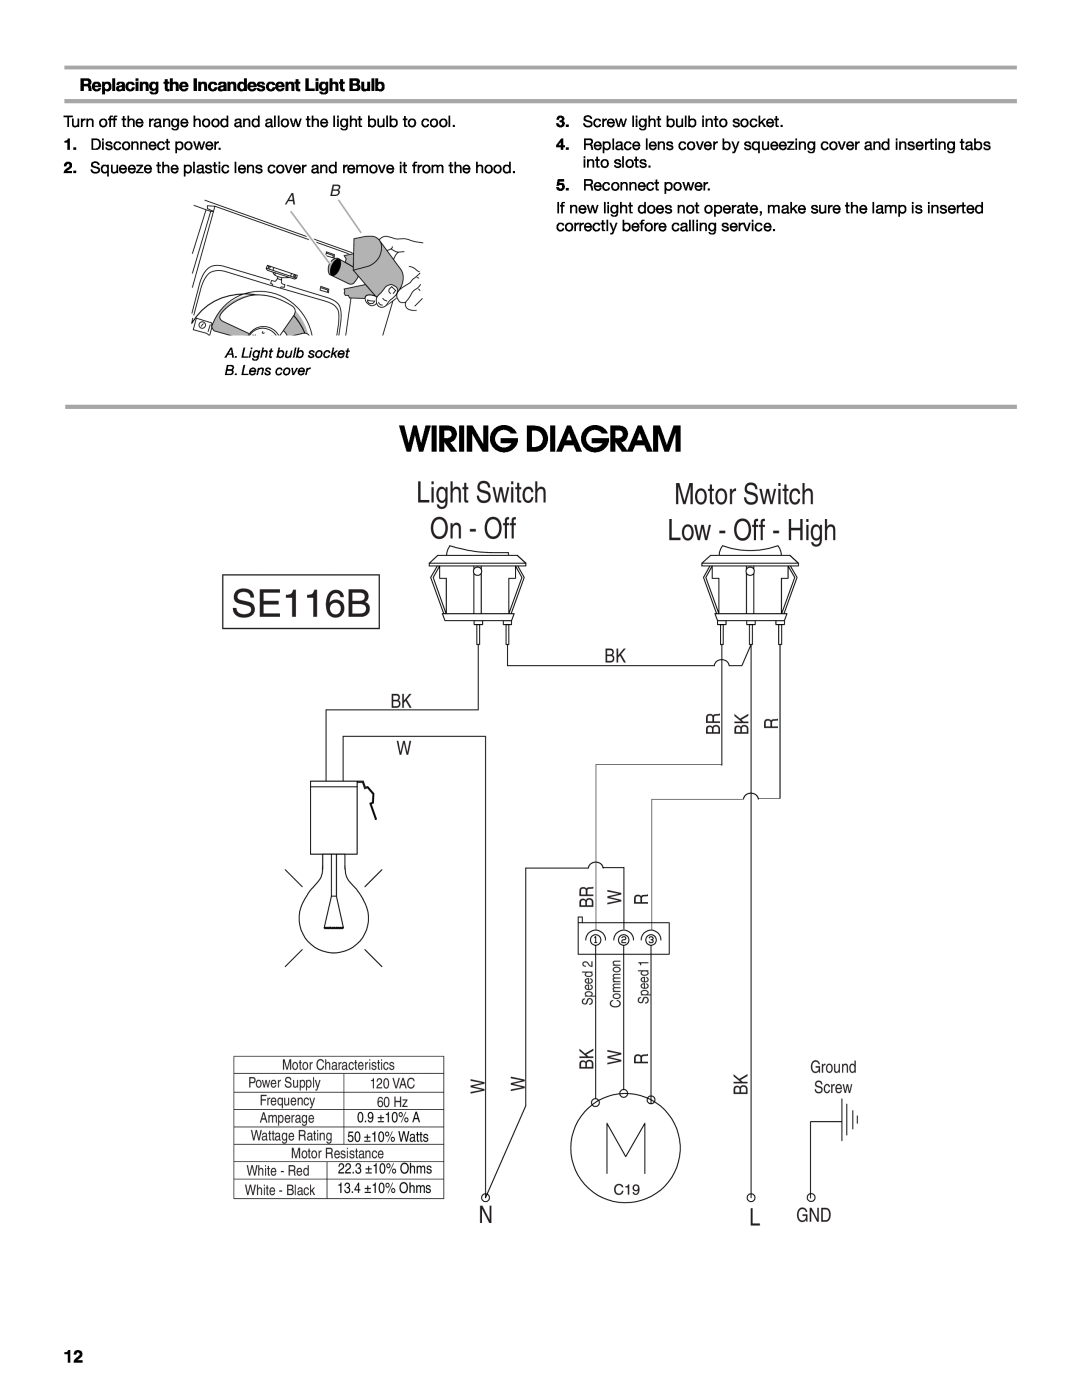 Whirlpool UXT3036AY Wiring Diagram, Motor Switch, Replacing the Incandescent Light Bulb, SE116B, Light Switch, On - Off 